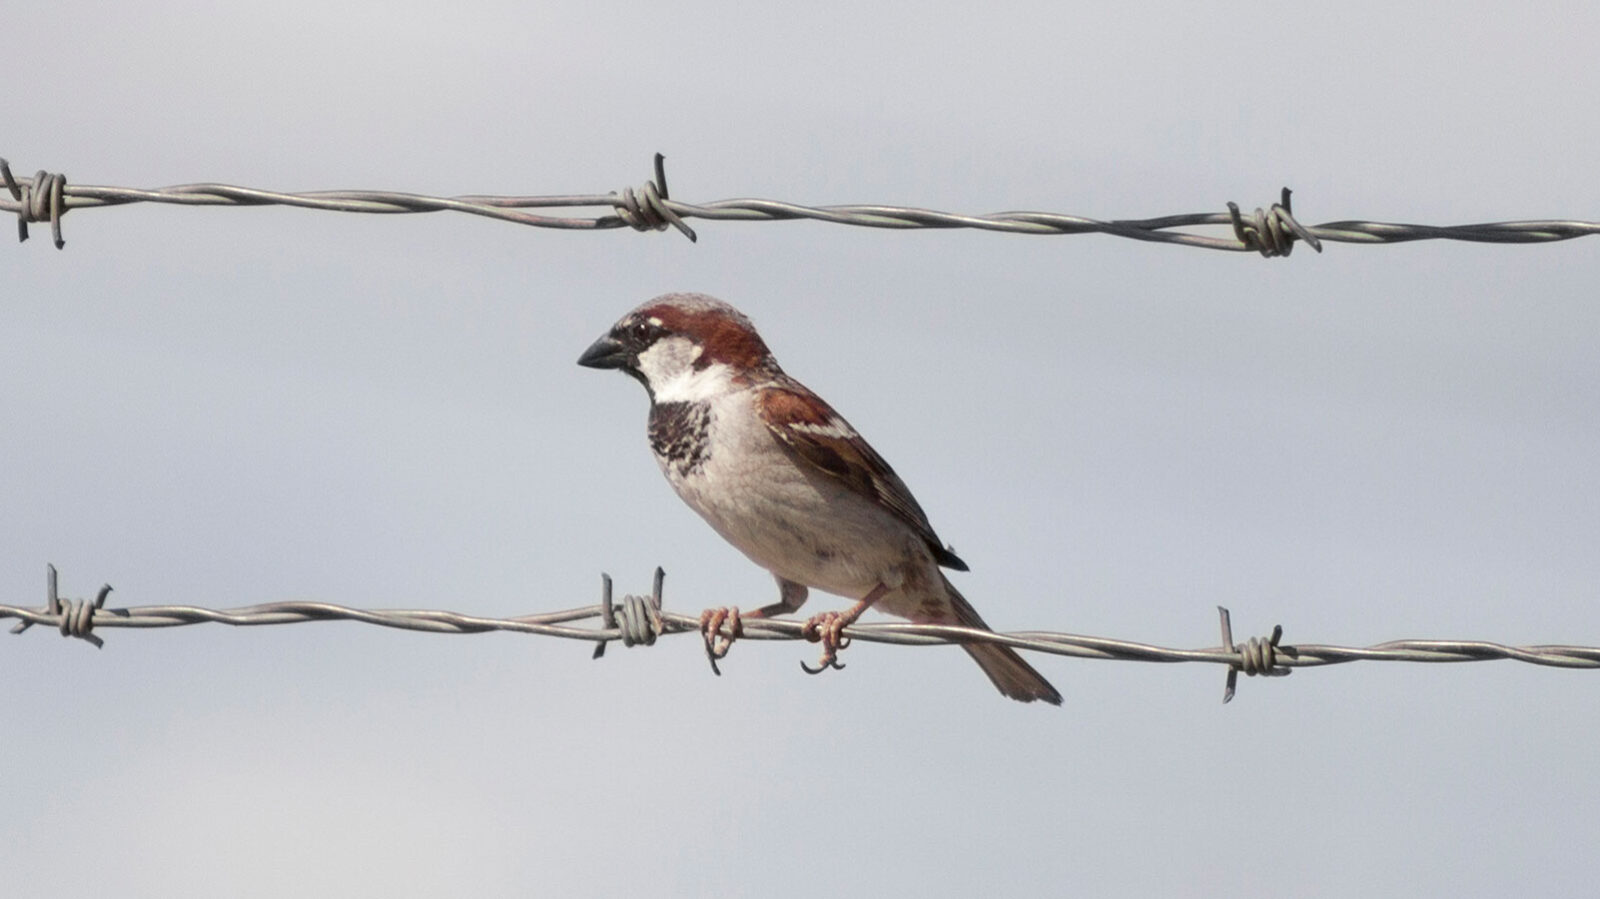 Male house sparrow on a wire fence